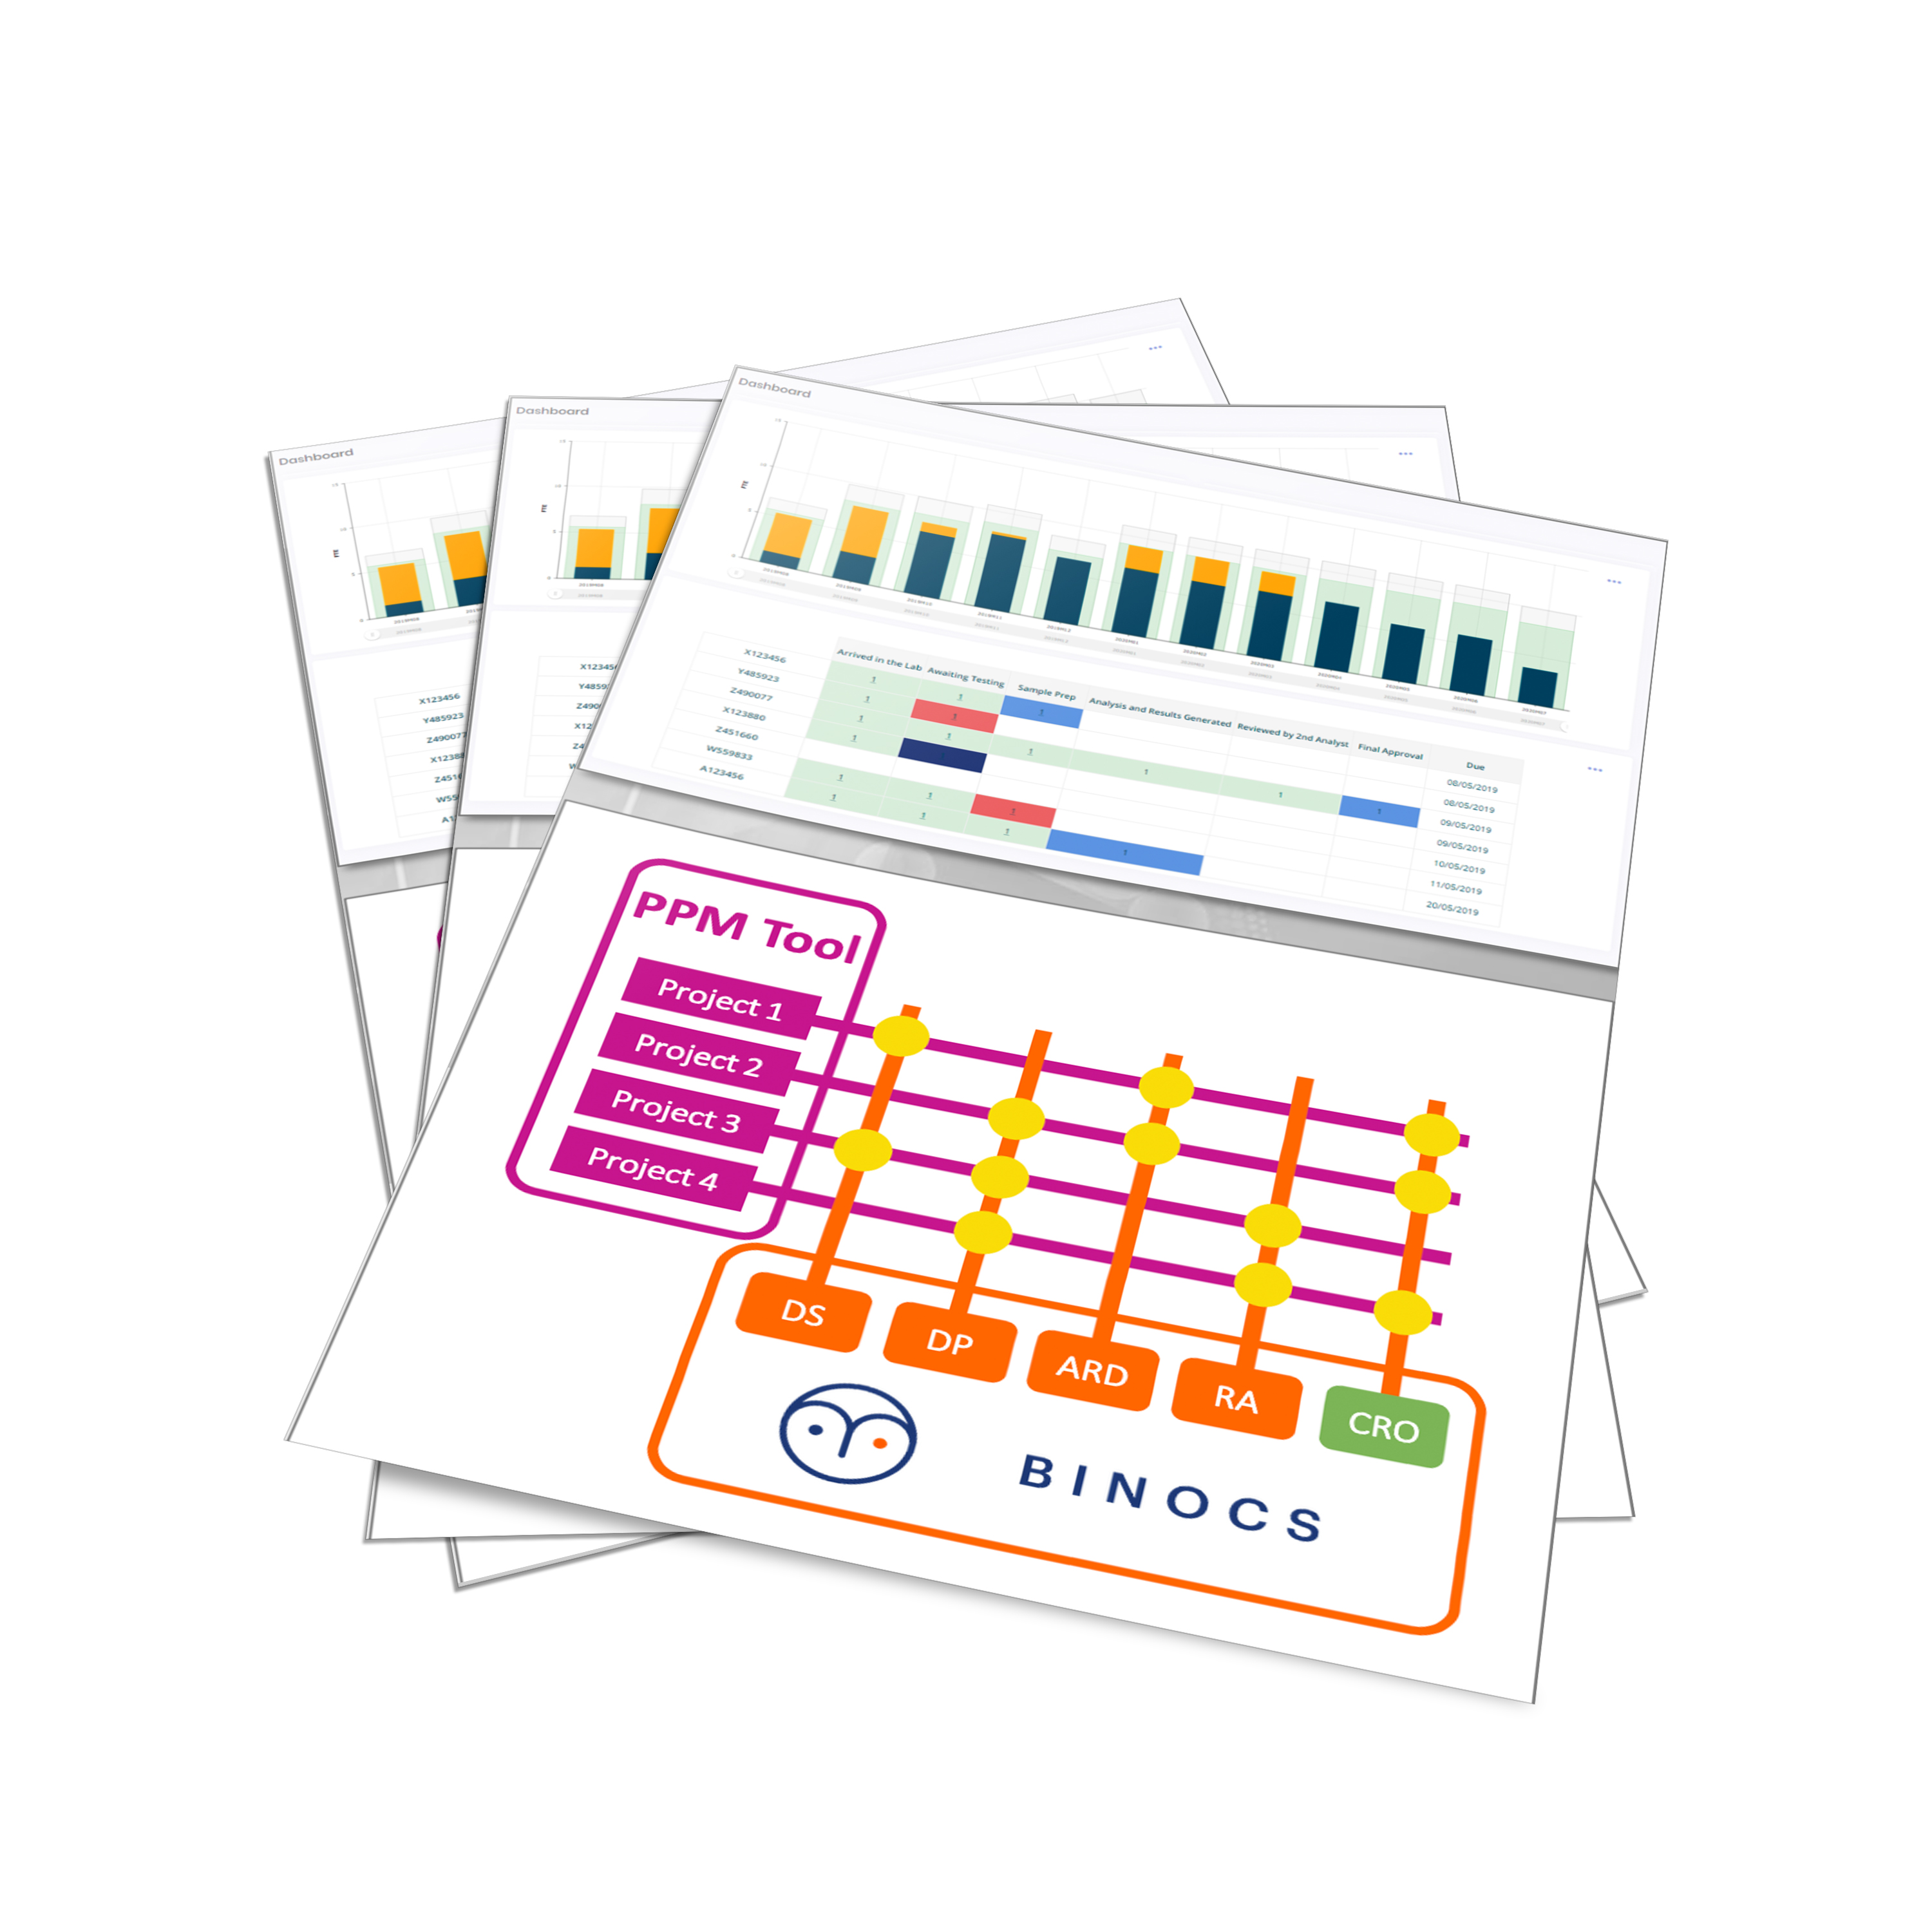 Binocs offers insight into planning and performance cloud solution